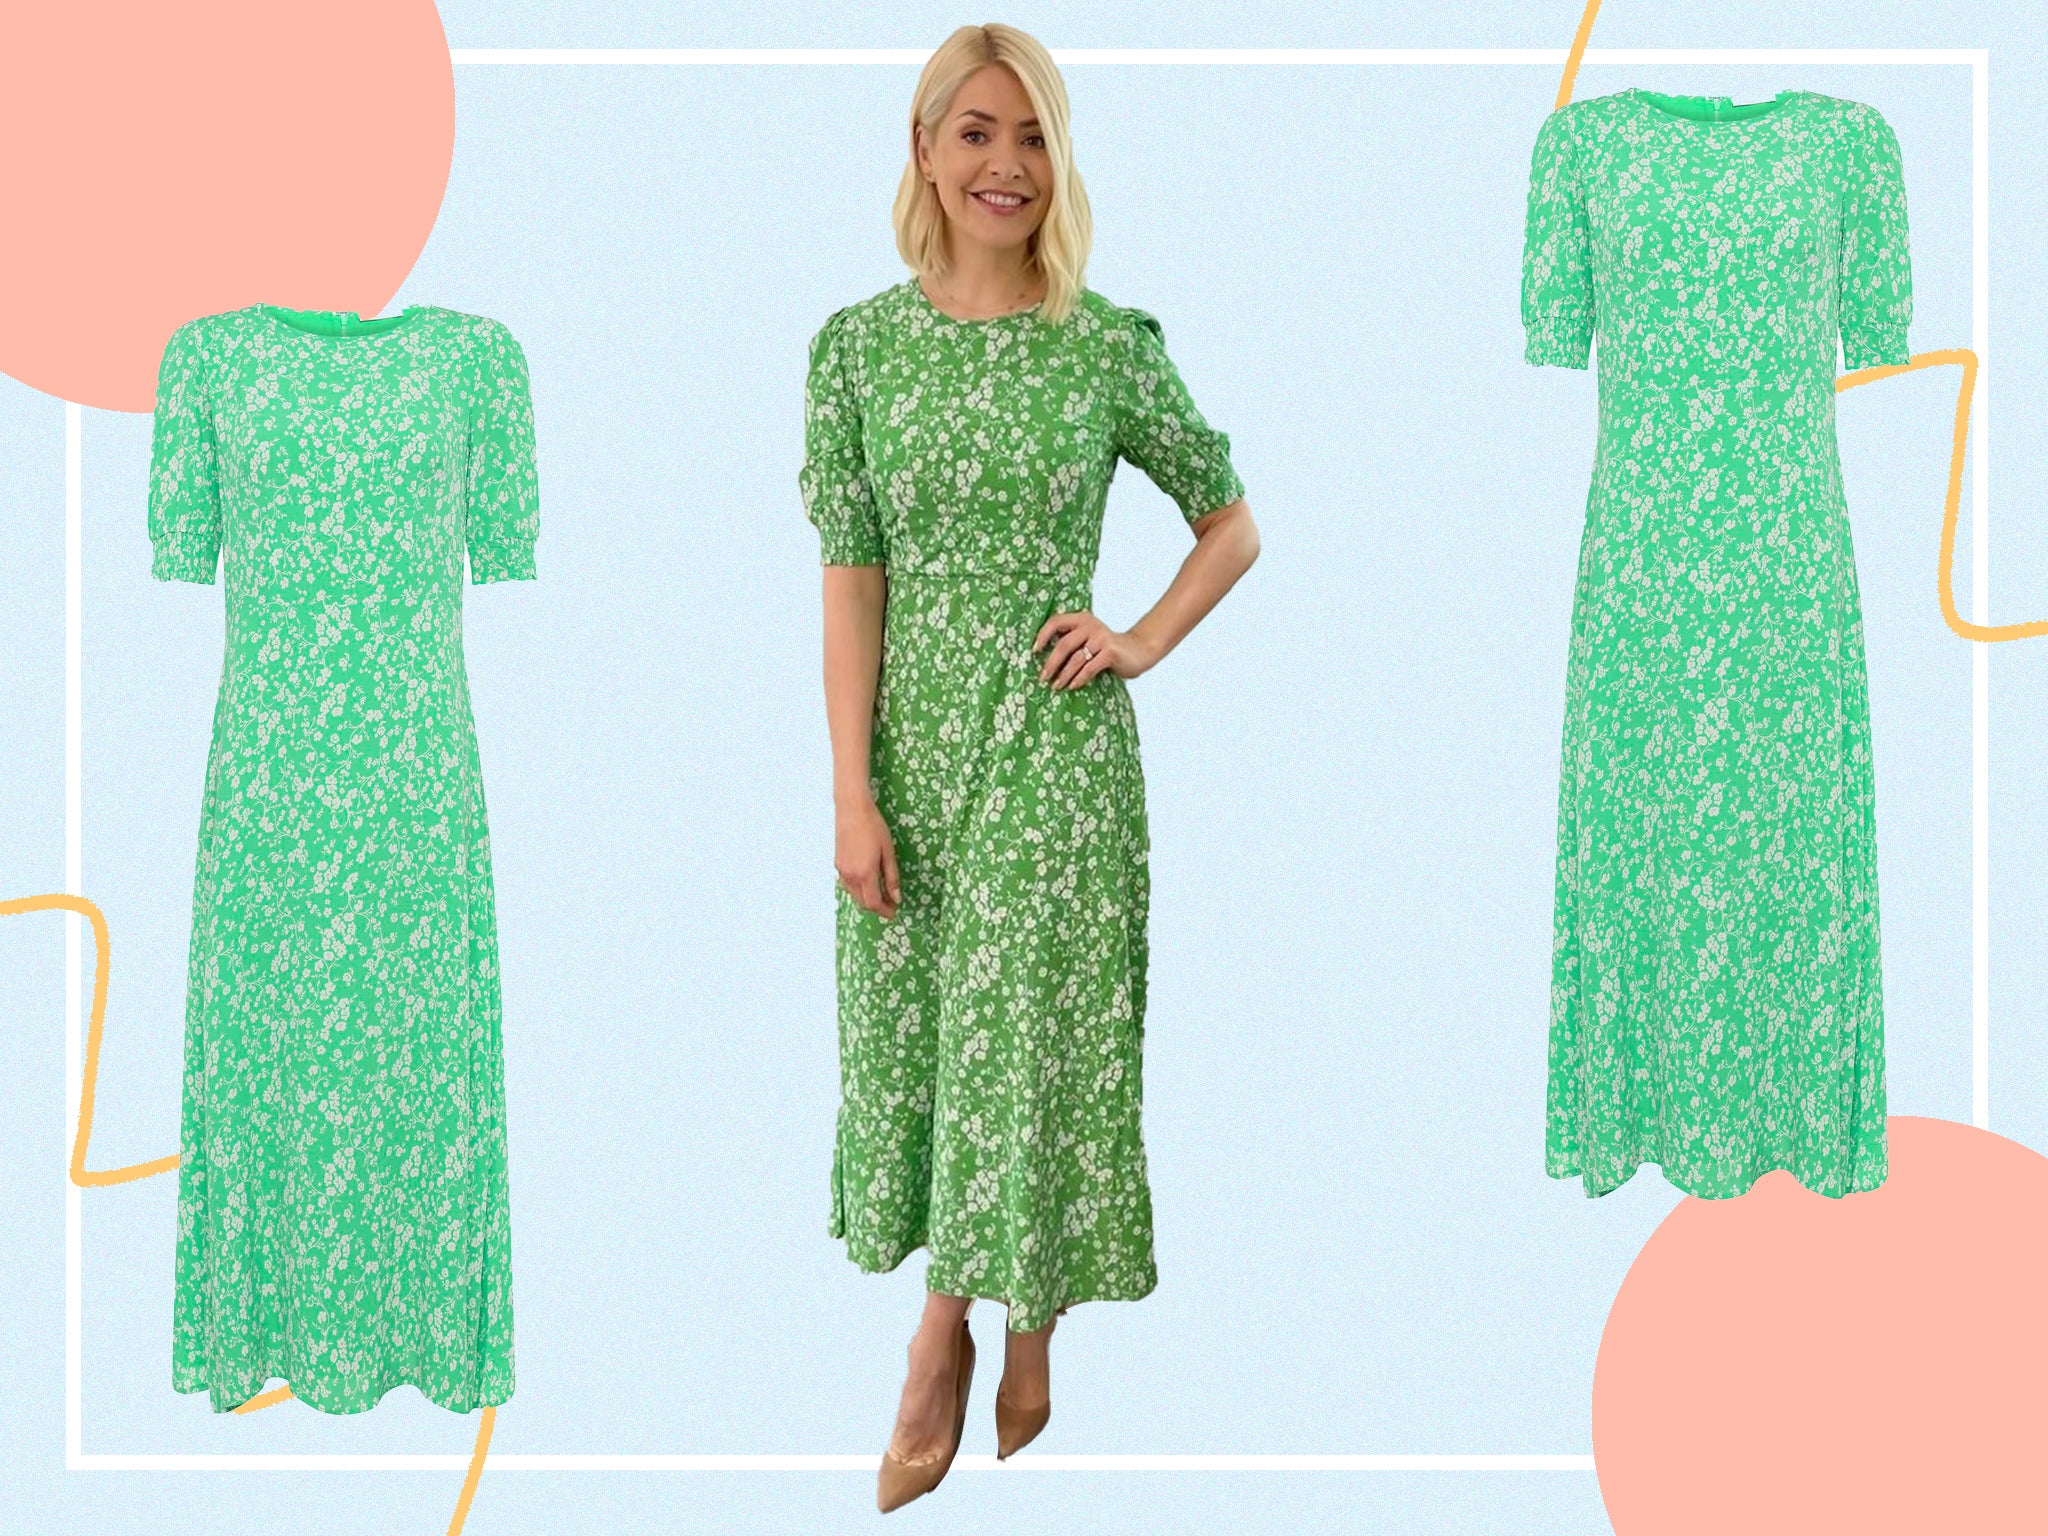 This midi couldn’t be more ideal for the summer months to come